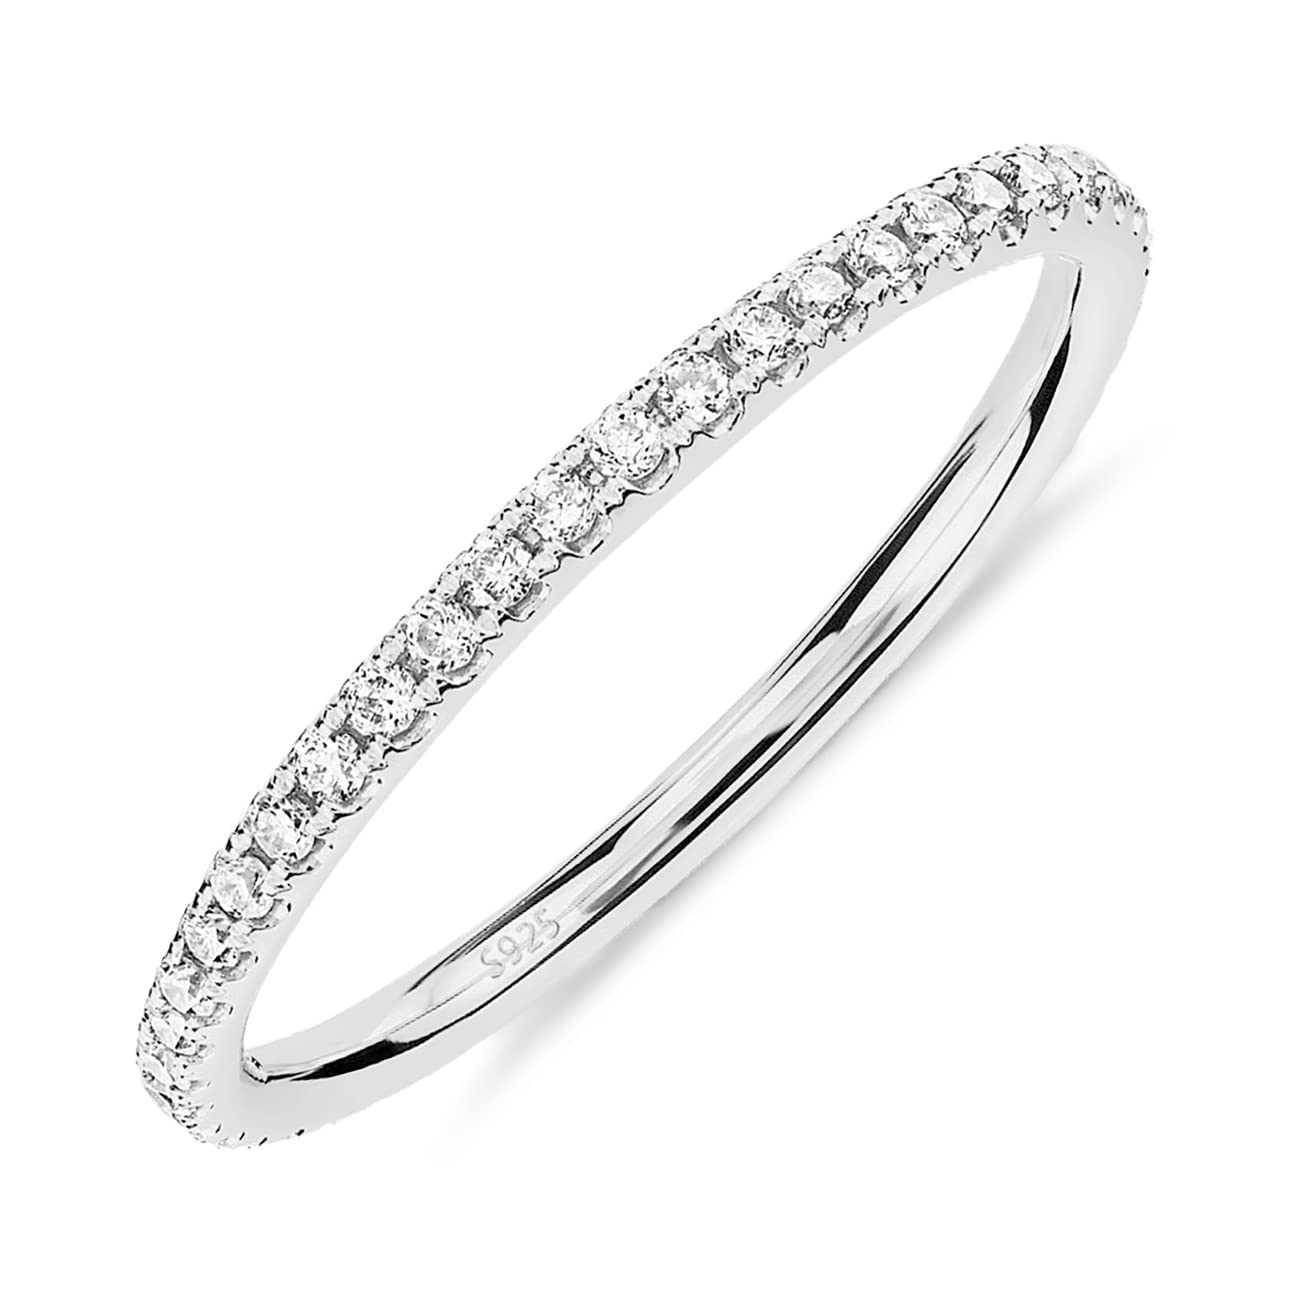 PAVOI Rhodium Plated 925 Sterling Silver Stackable CZ Ring for Women | Thin Band for Stacking | Simulated Diamond Eternity Wedding Band | Size 7